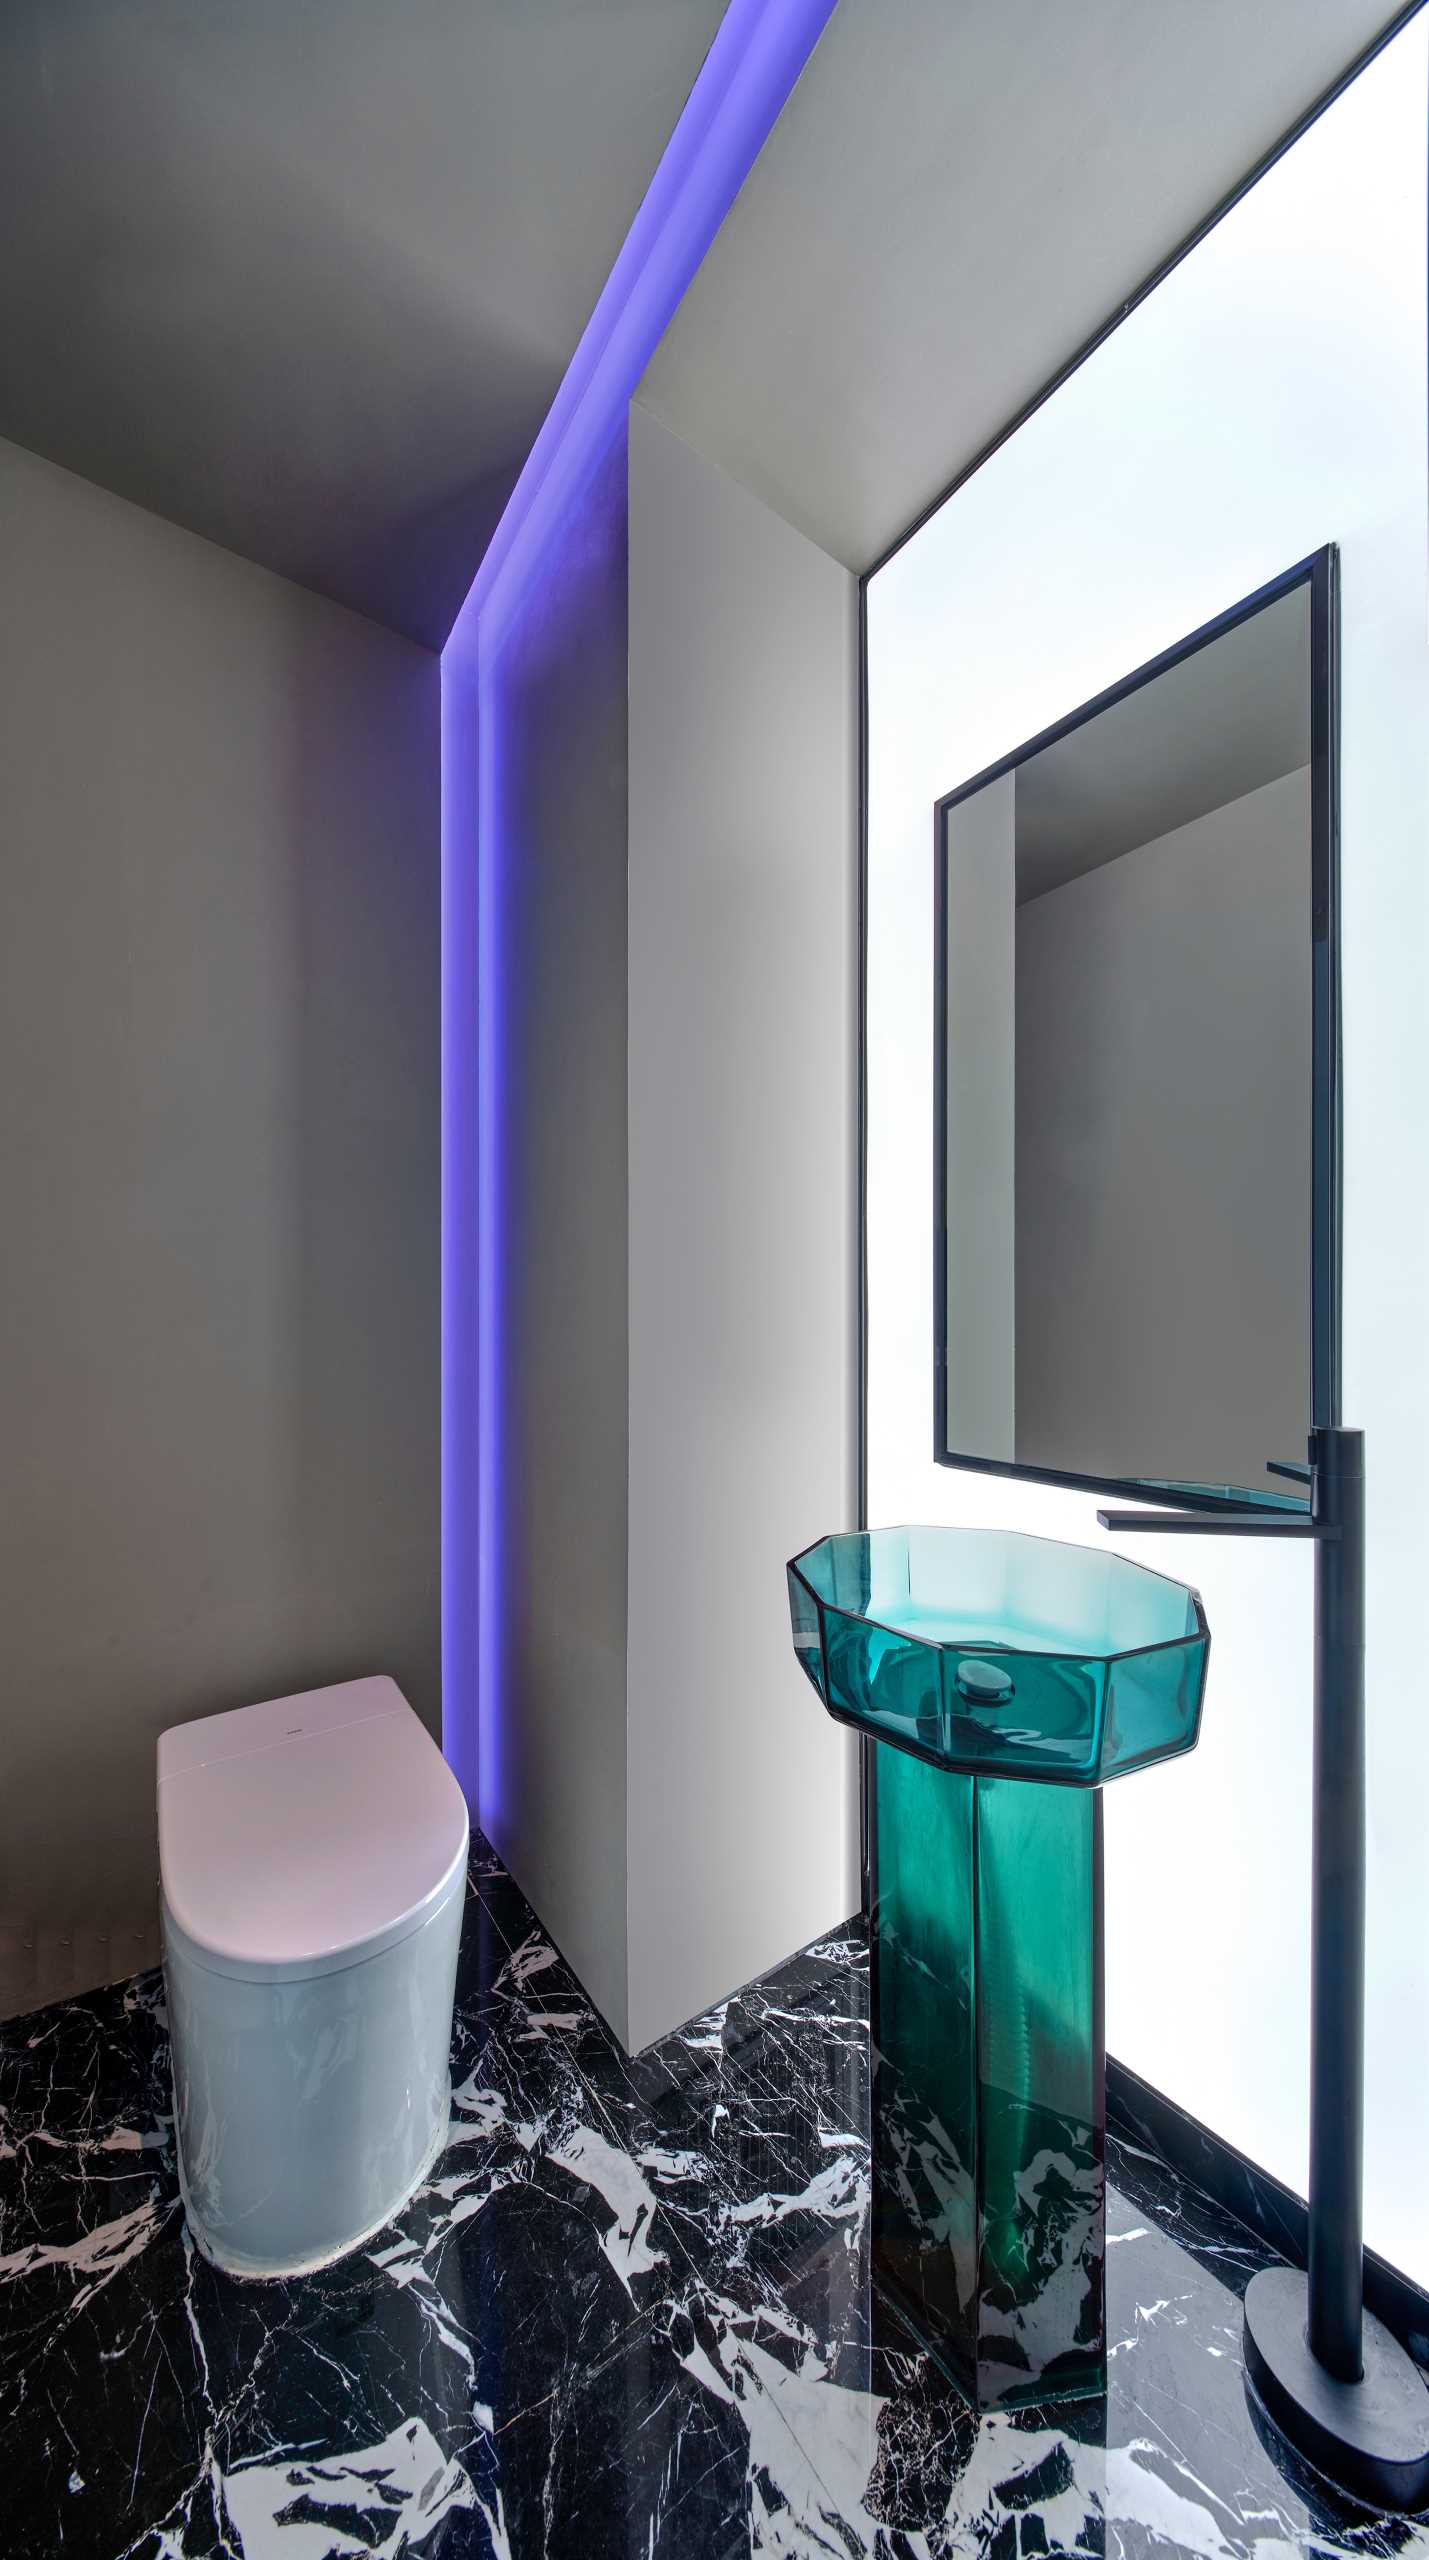 In the bathroom, there's purple LED lighting that lines the wall and a green glass pedestal basin.